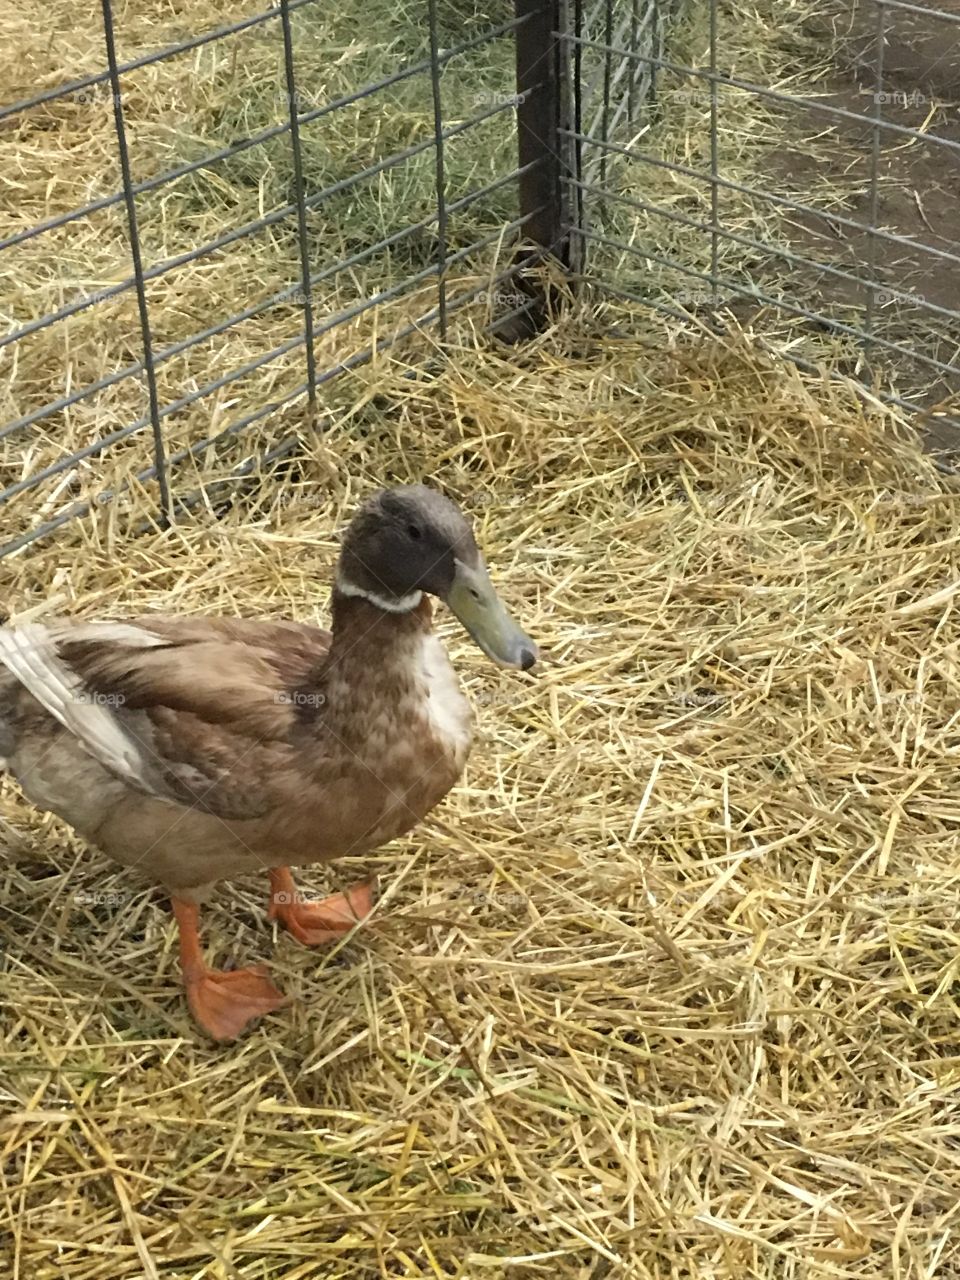 Duck at the petting farm 